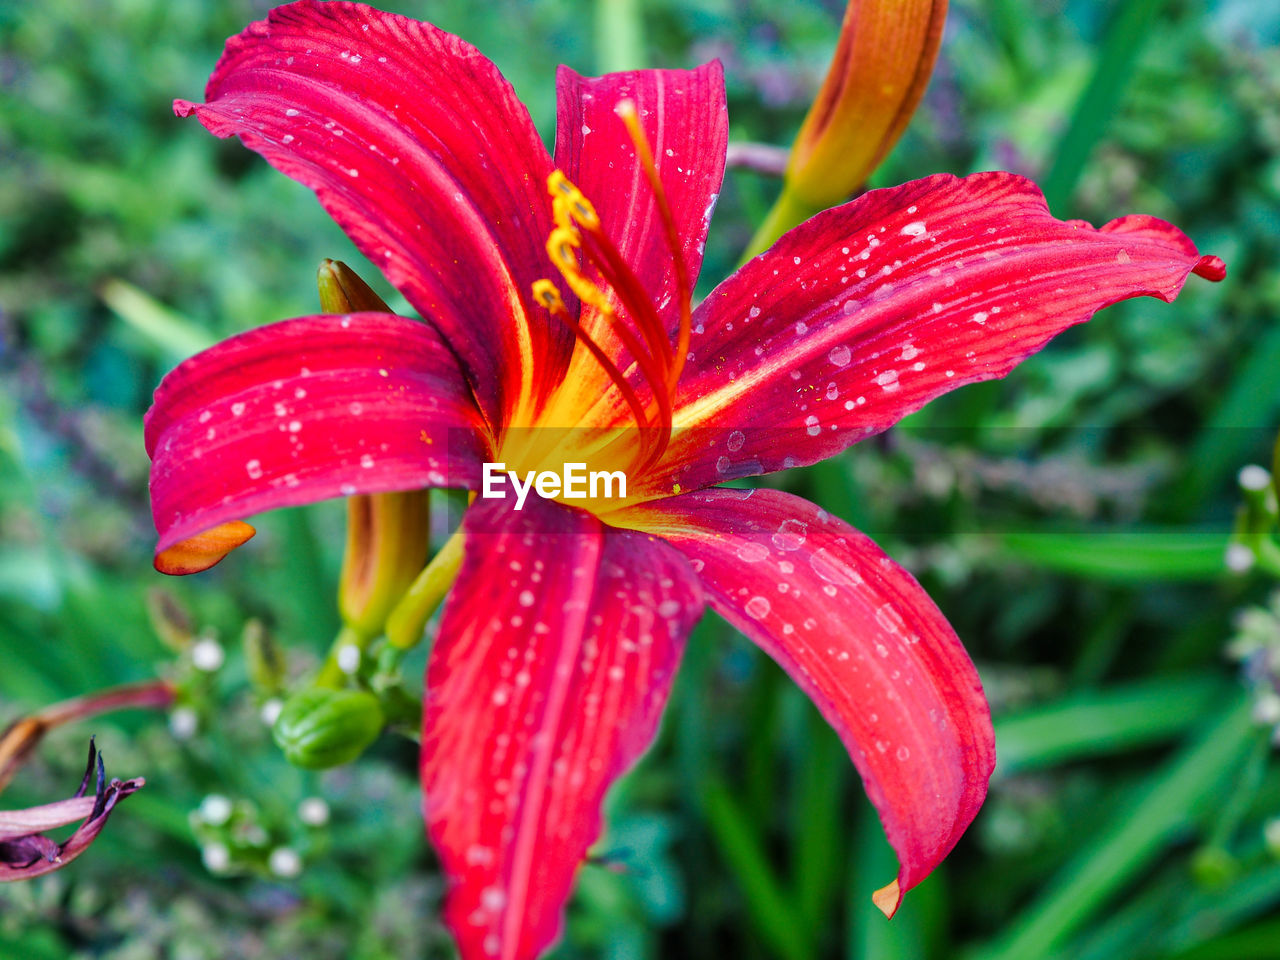 Close-up of wet red lily blooming outdoors